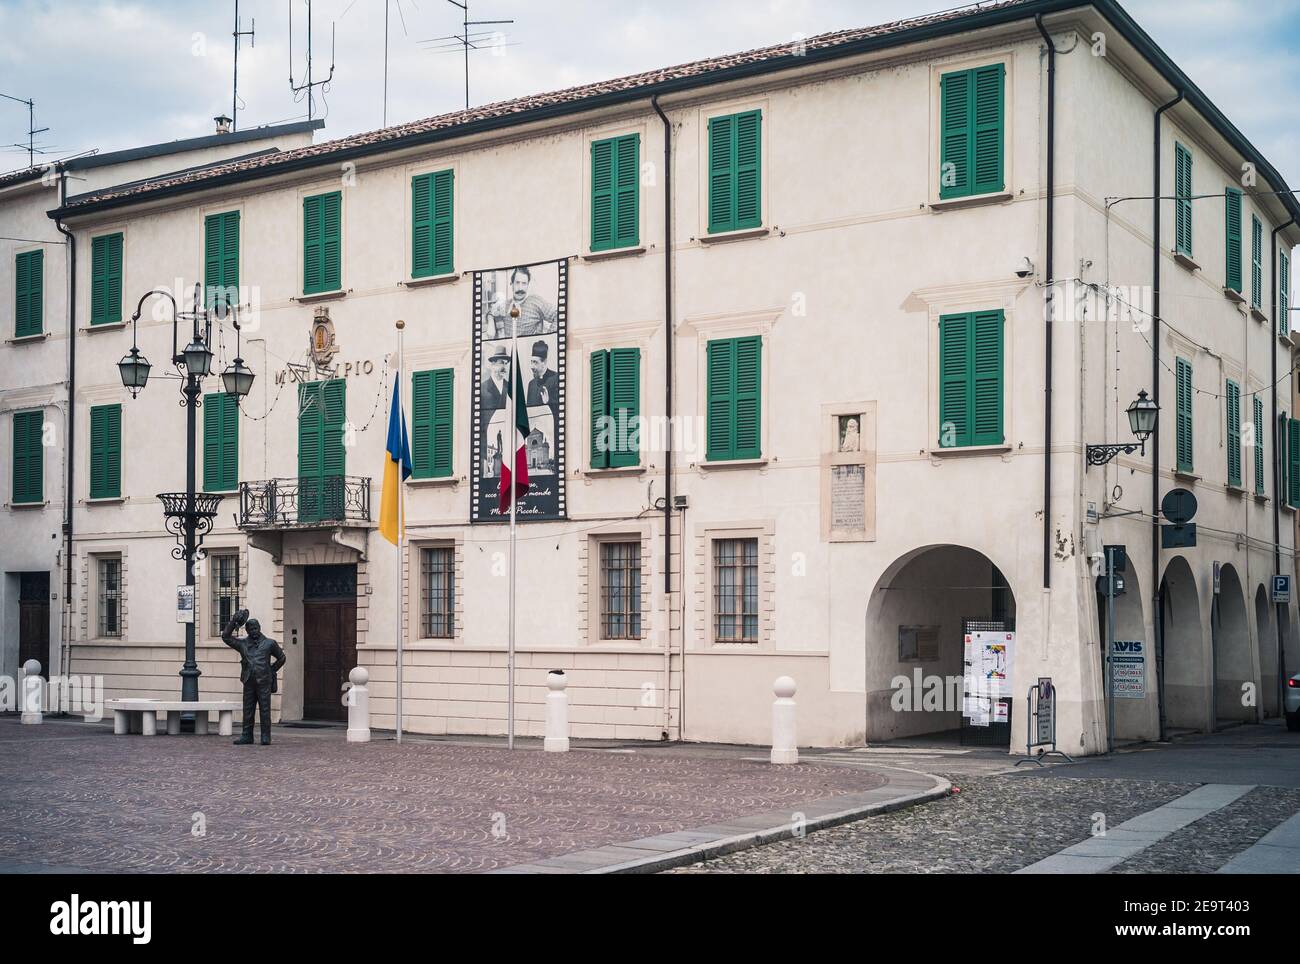 Brescello, Italy - January 1 2014: Town Hall called Municipio with the Statue of Mayor Peppone, a fictional Character from the Don Camillo Movies and Stock Photo